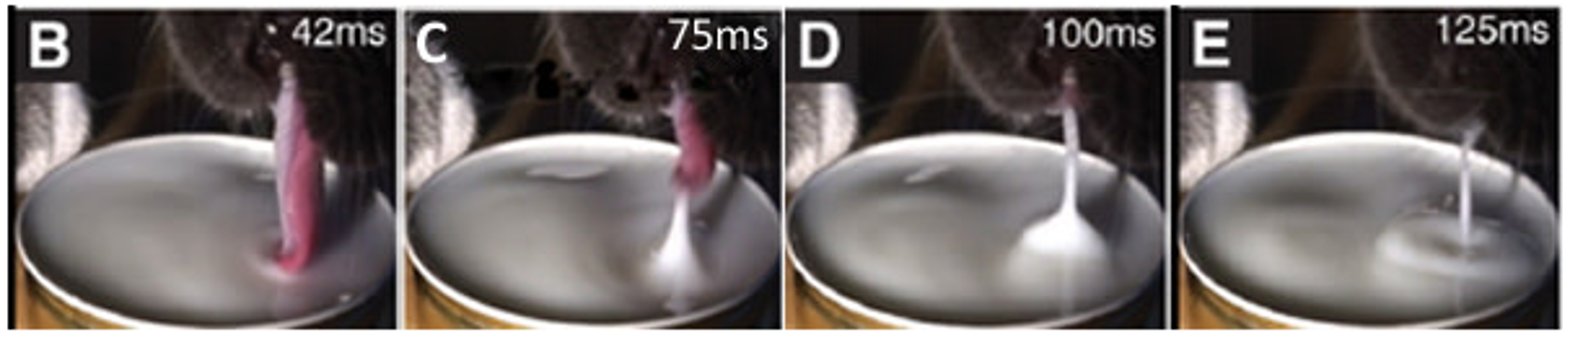 Images of cats drinking at different short time frames